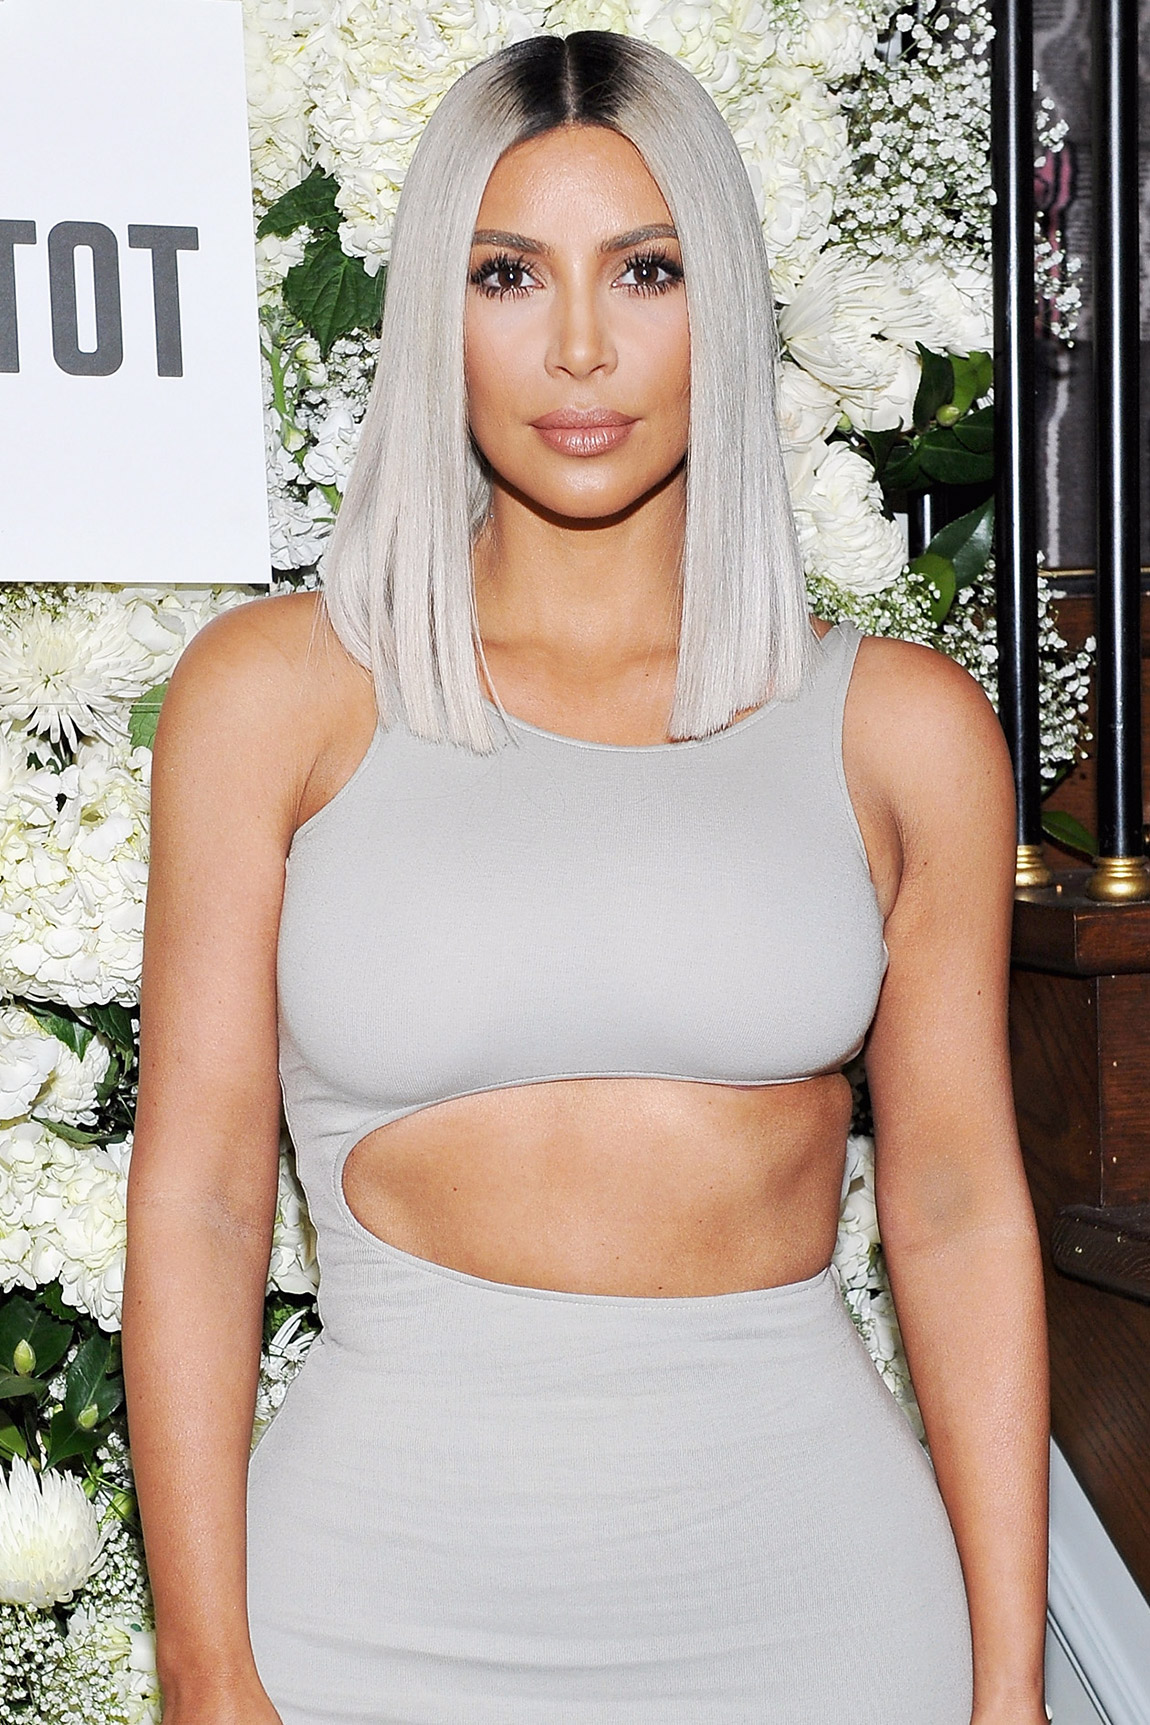 Kim Kardashian West Is 'Over' Her Blonde Hair | PEOPLE.com